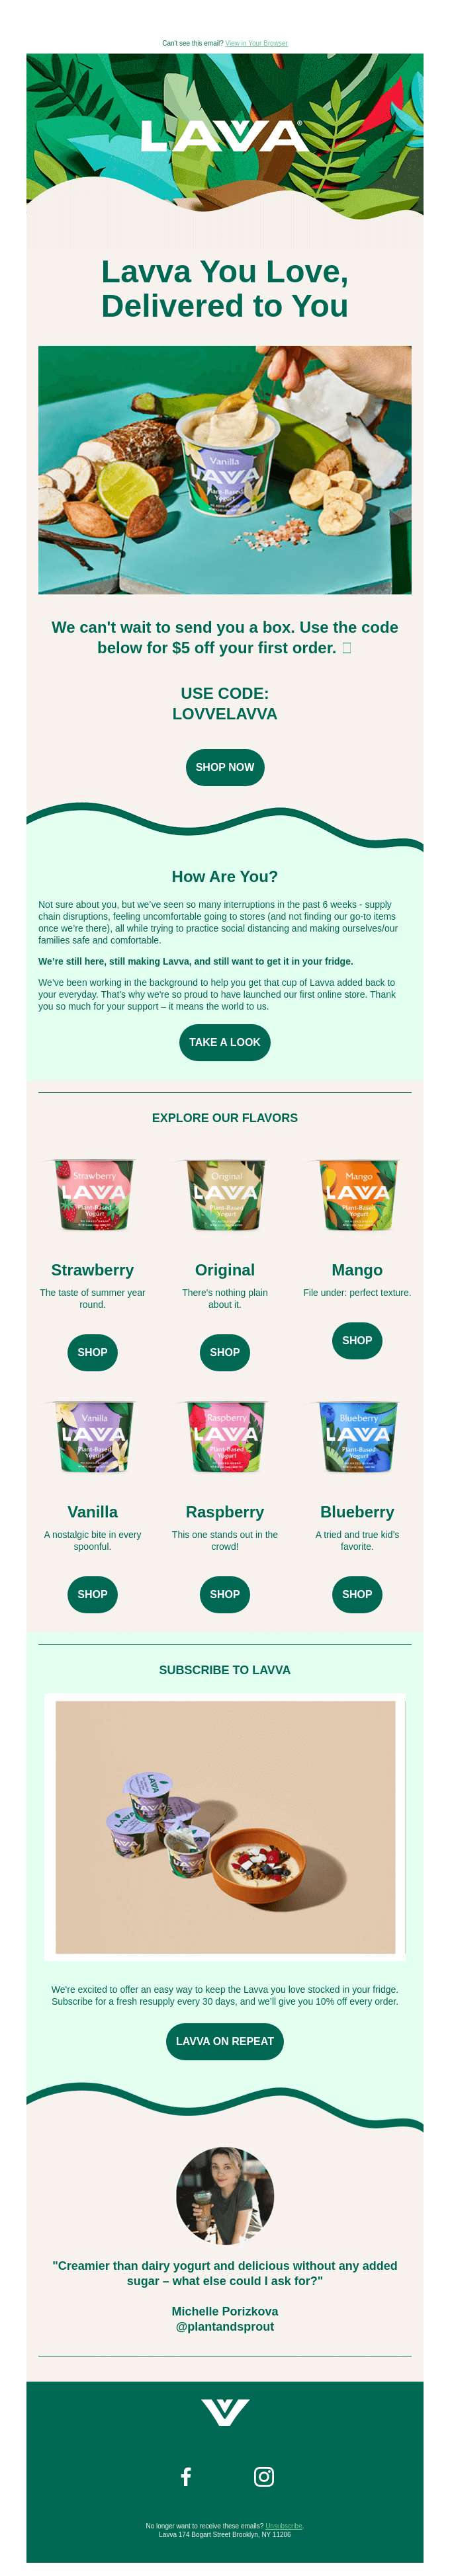 Exciting News! 🎉You can now buy Lavva online ✨